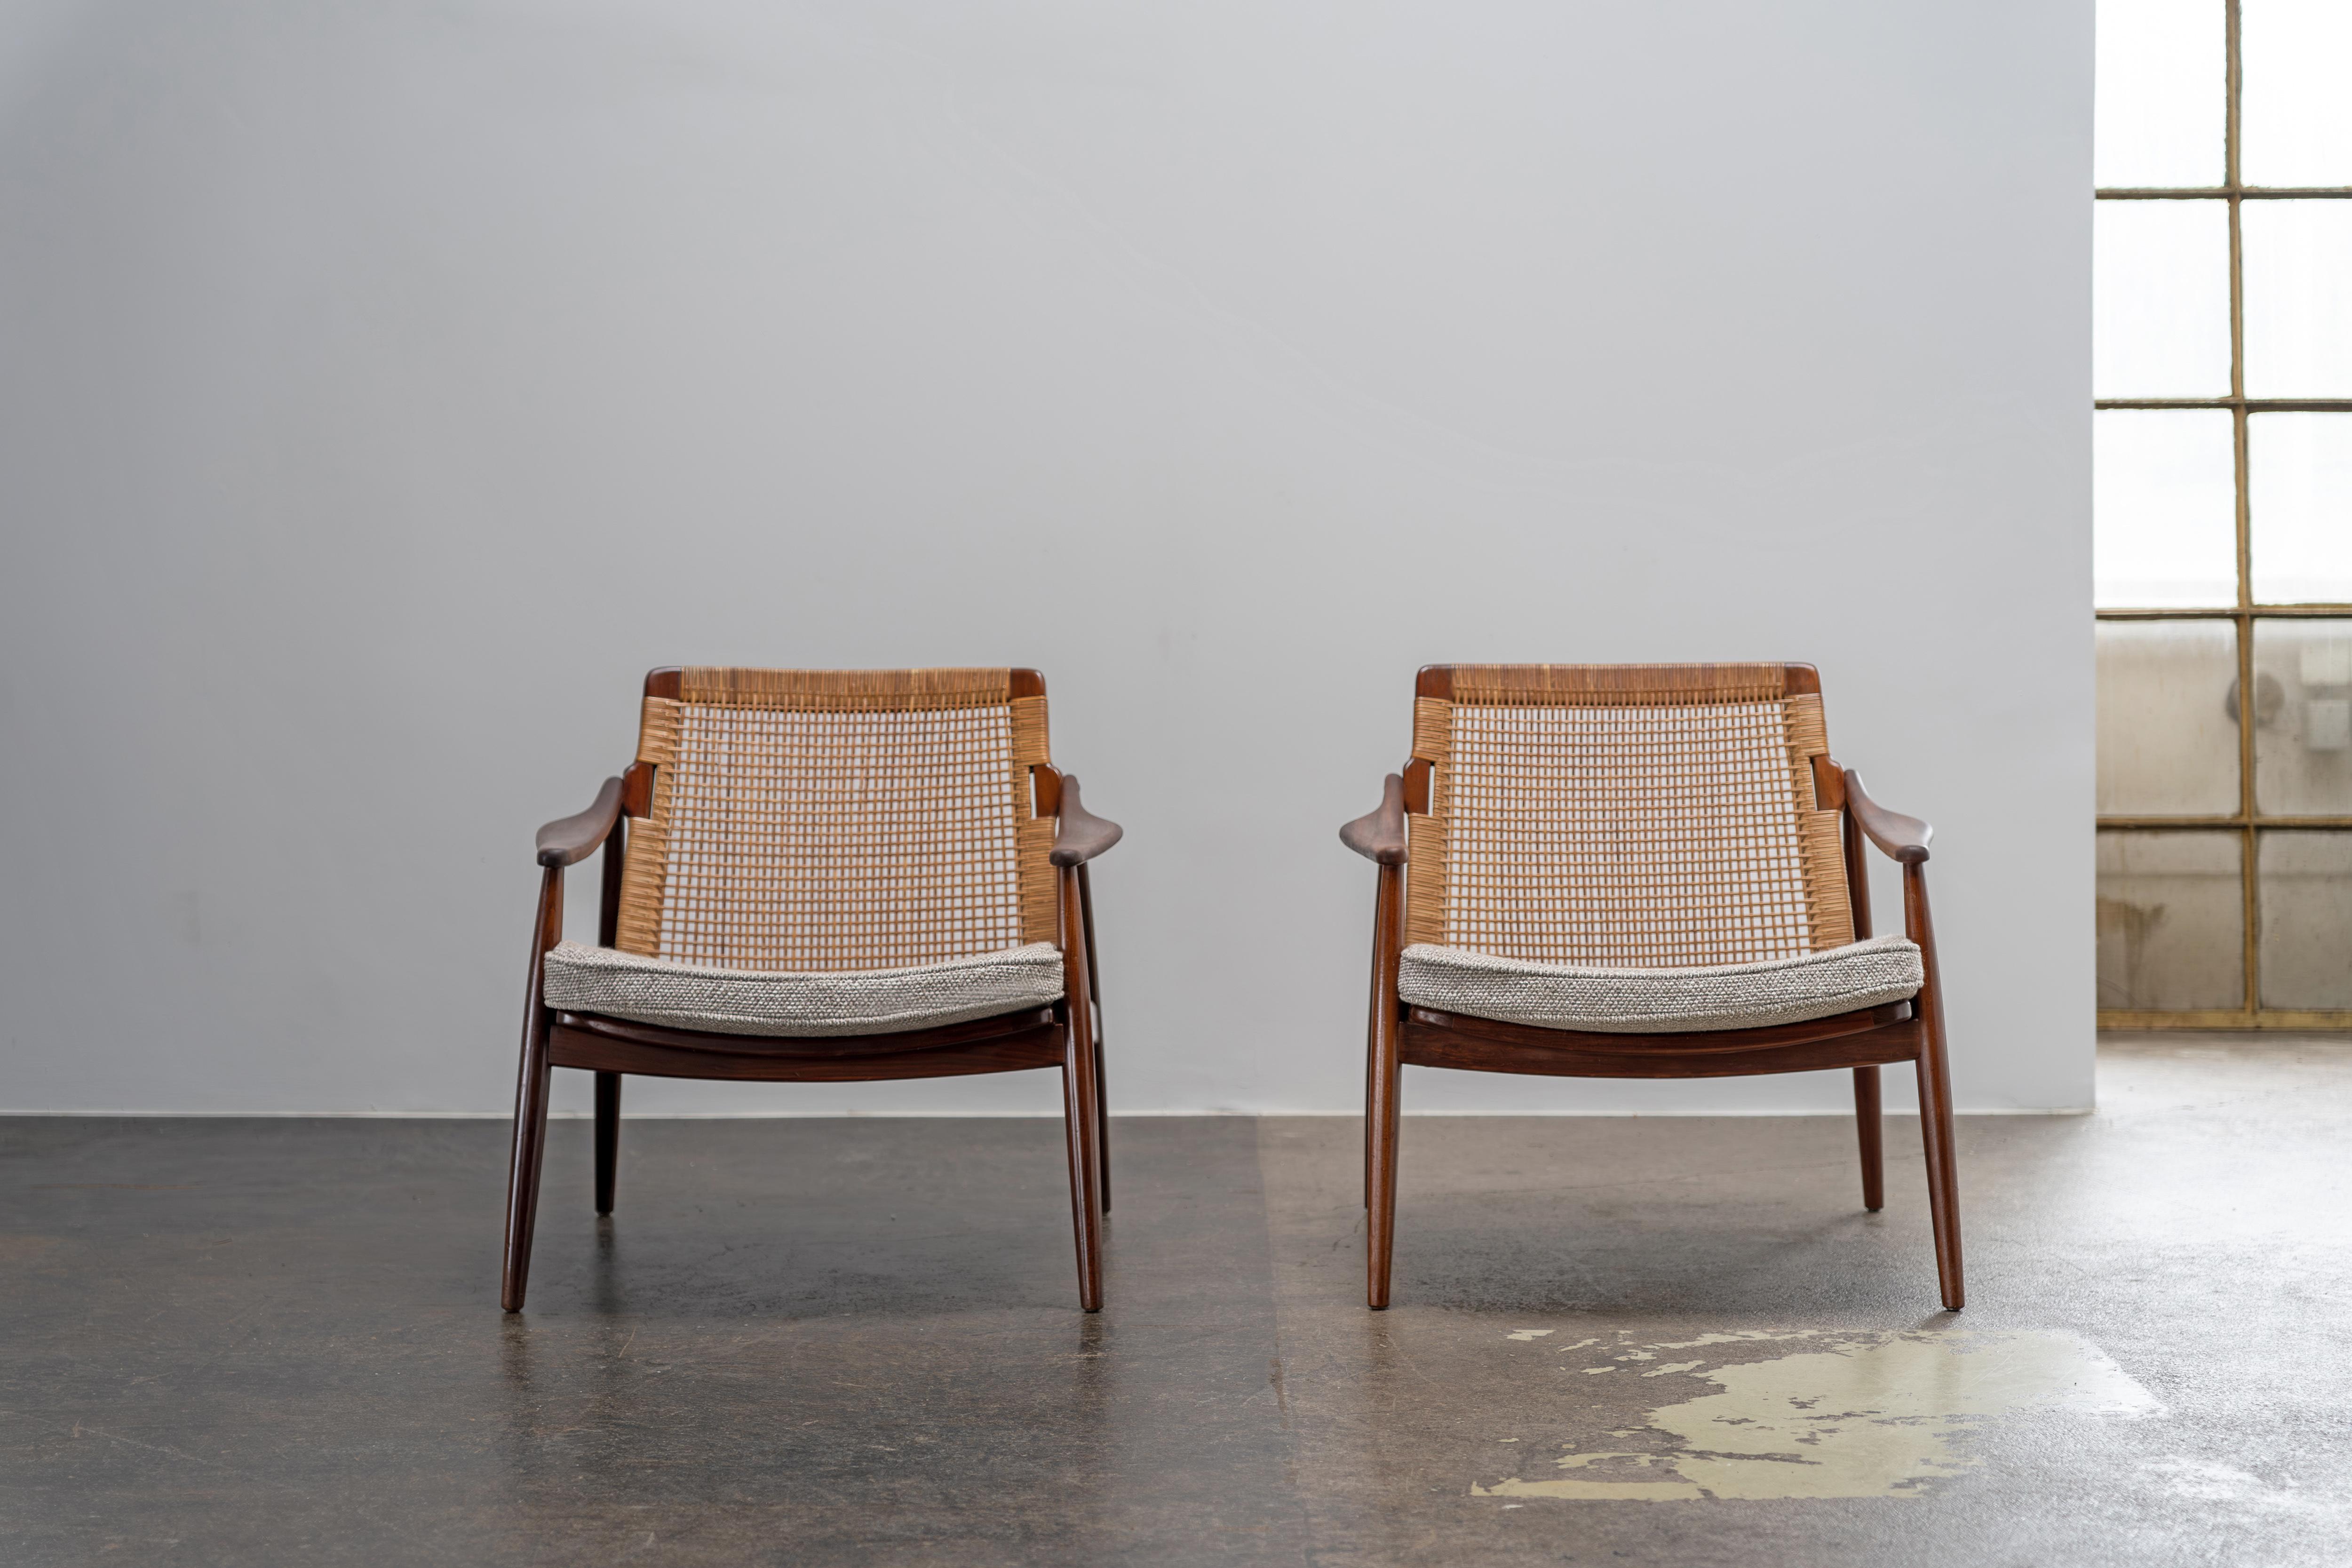 German Mid-Century Teak and Cane Easy Chairs  by Hartmut Lohmeyer for Wilkhahn, 1950s